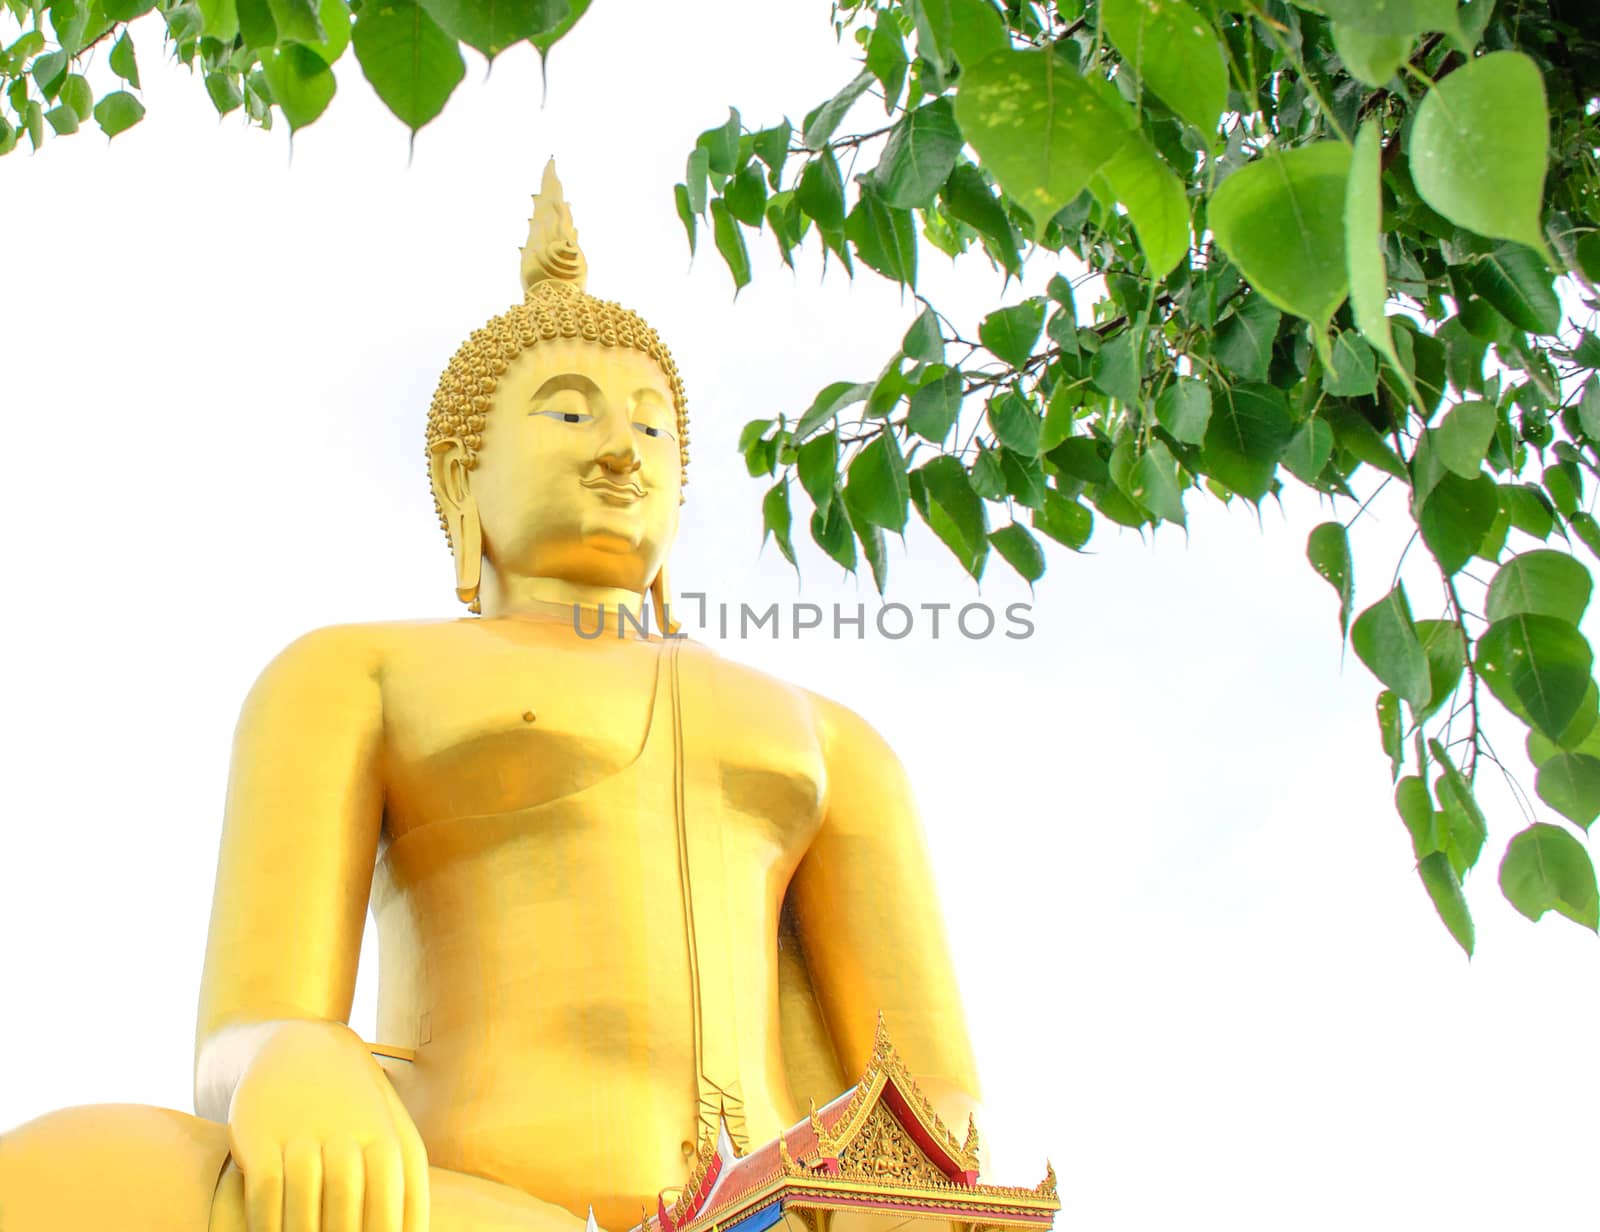 Golden Seated Buddha Image and Pipal leaf on White Background by kobfujar